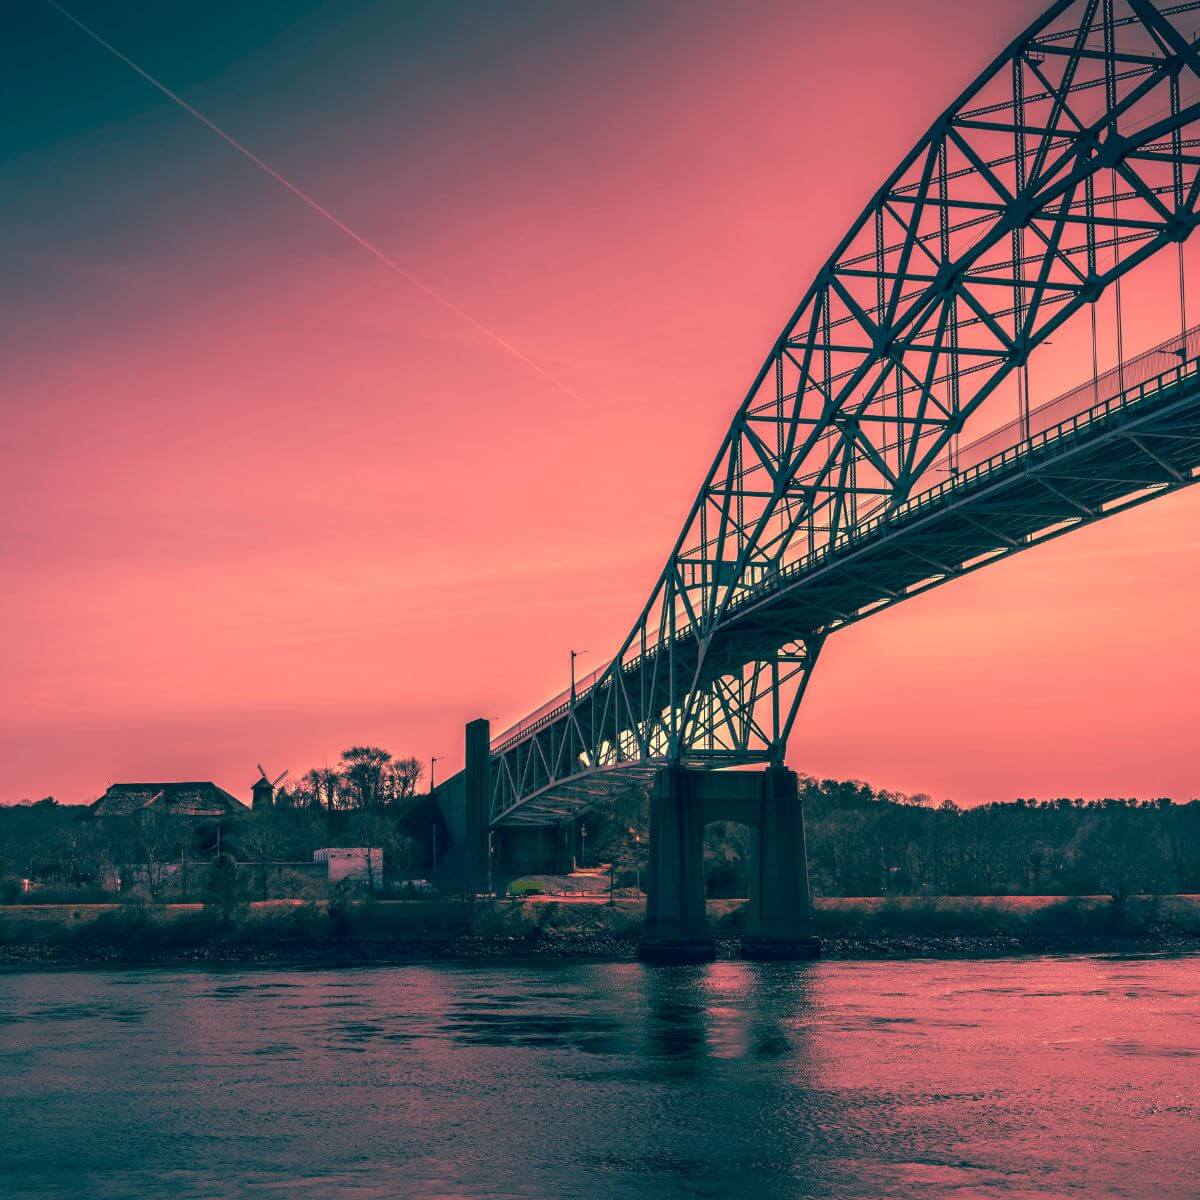 Photo of the Sagamore Bridge at sunset with a red sky.